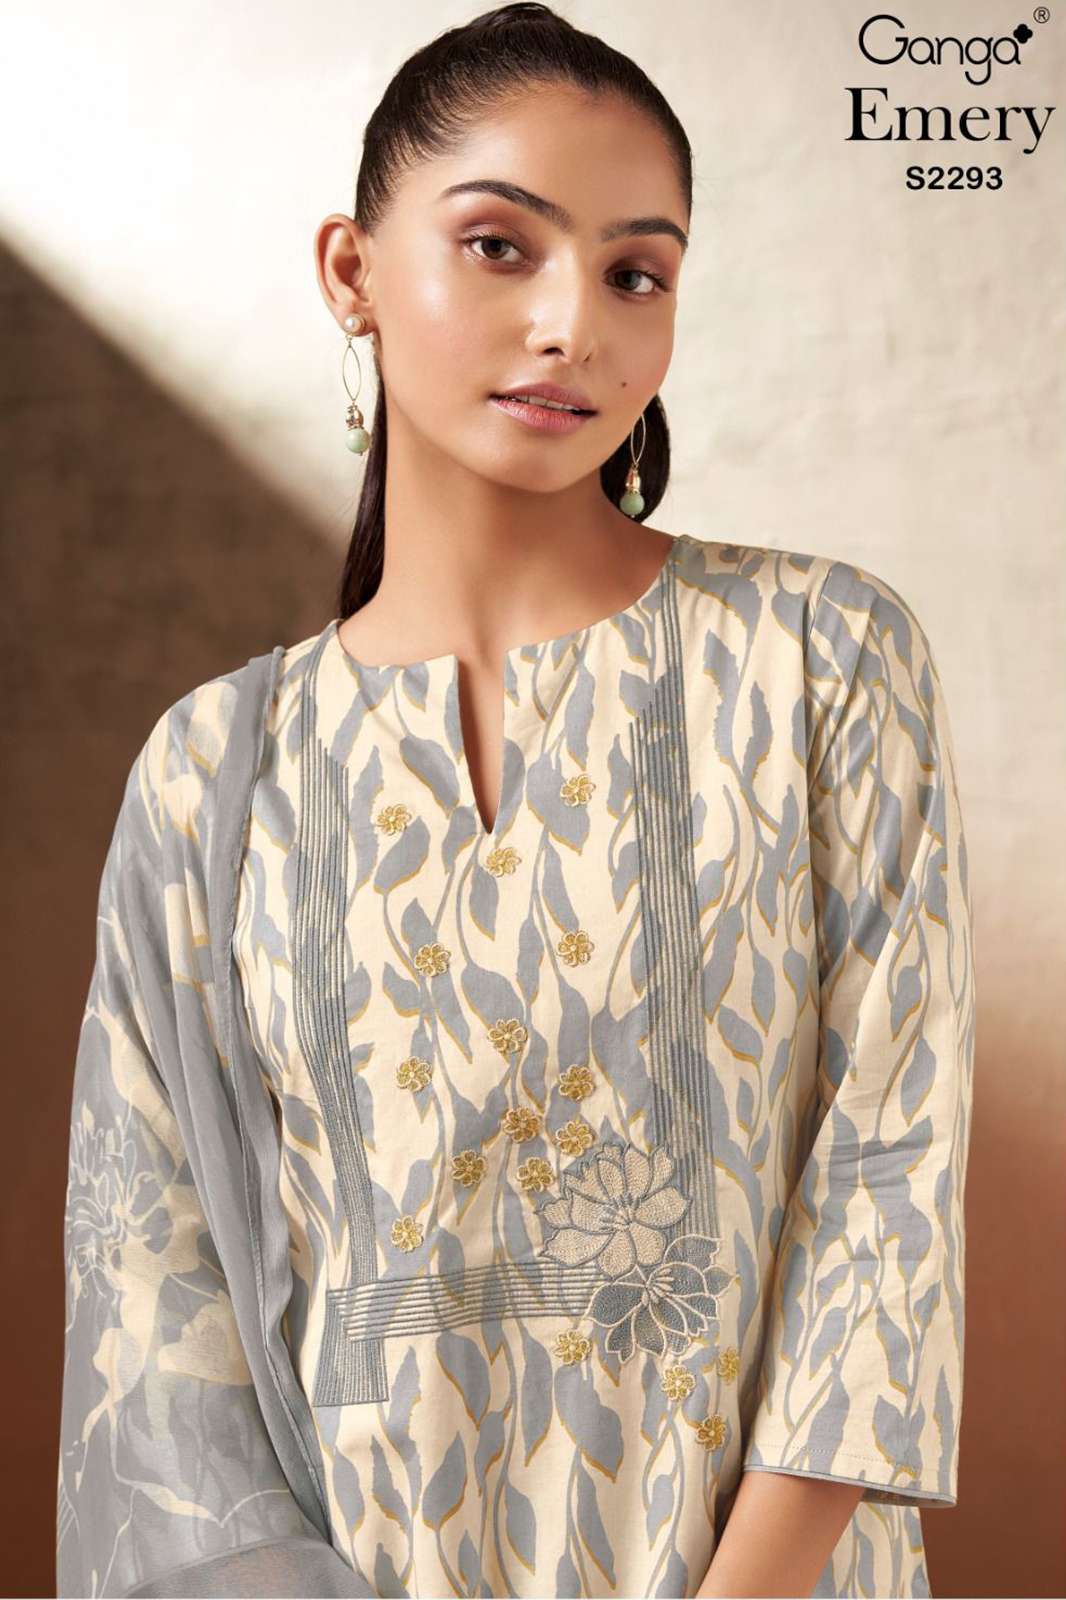  Ganga Emery 2293 PREMIUM COTTON PRINTED WITH EMBROIDERY AND EMBROIDERY LACE ON DAMAN SUIT